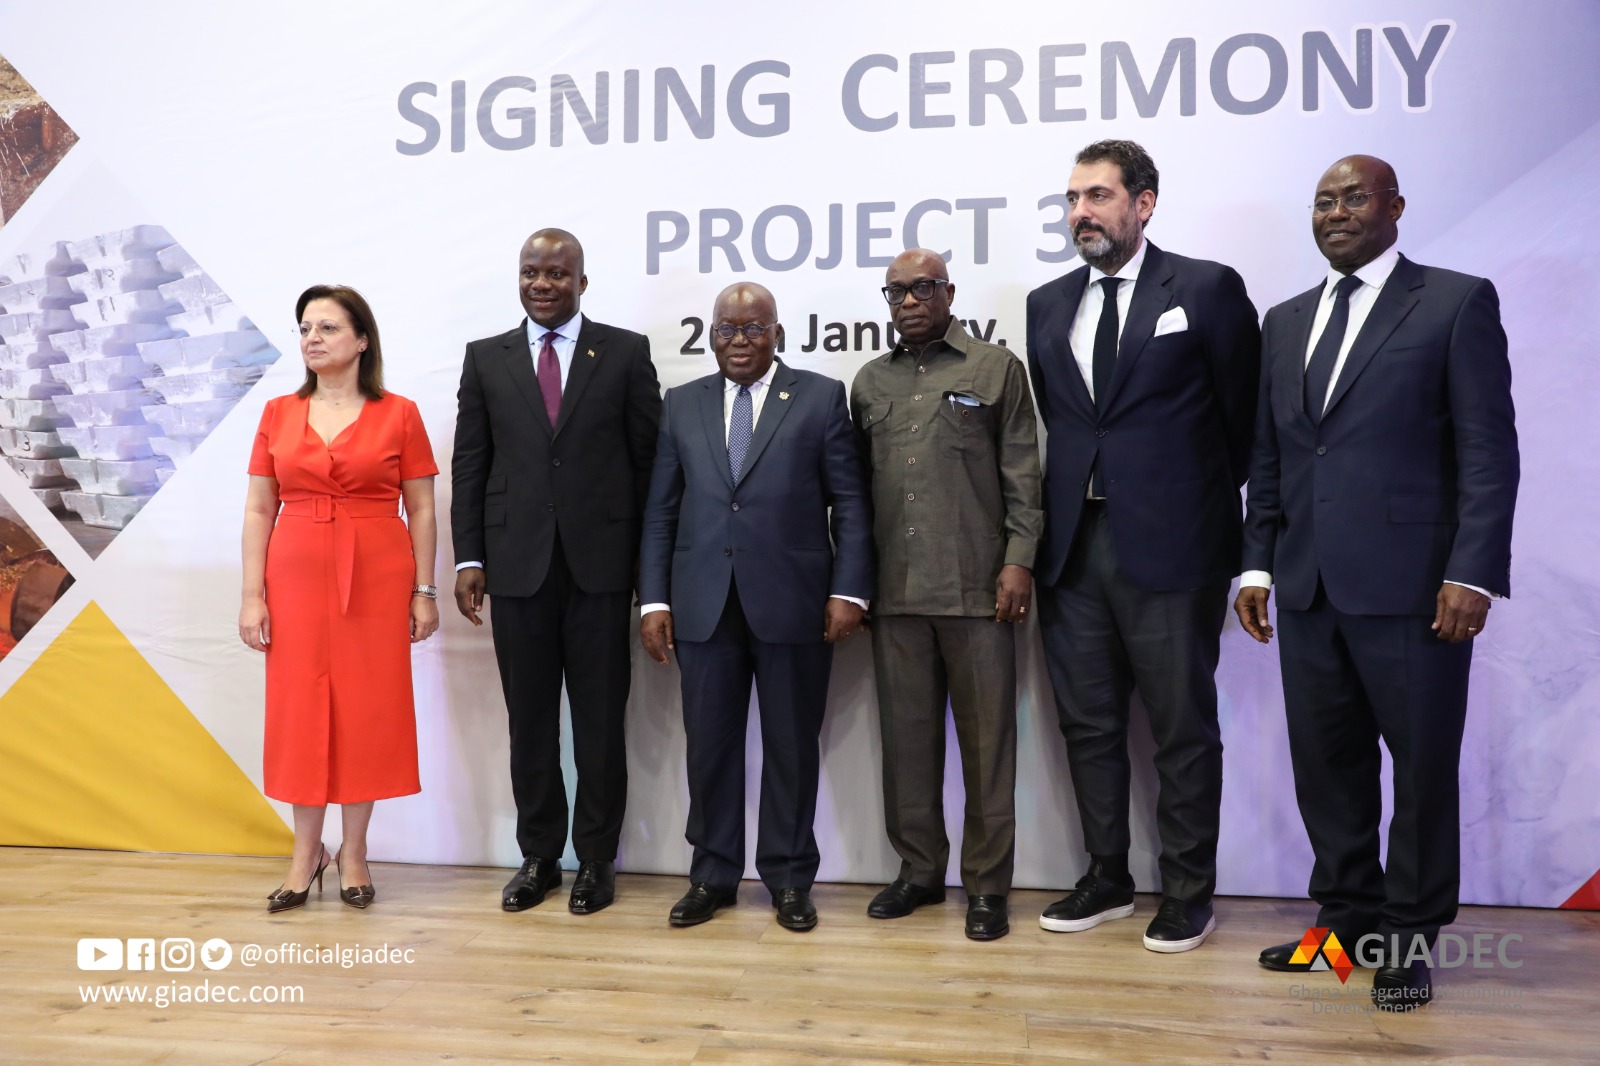 New Alumina Refinery To Be Developed As President Akufo Addo Announces GIADEC's Strategic Partner For Project 3A